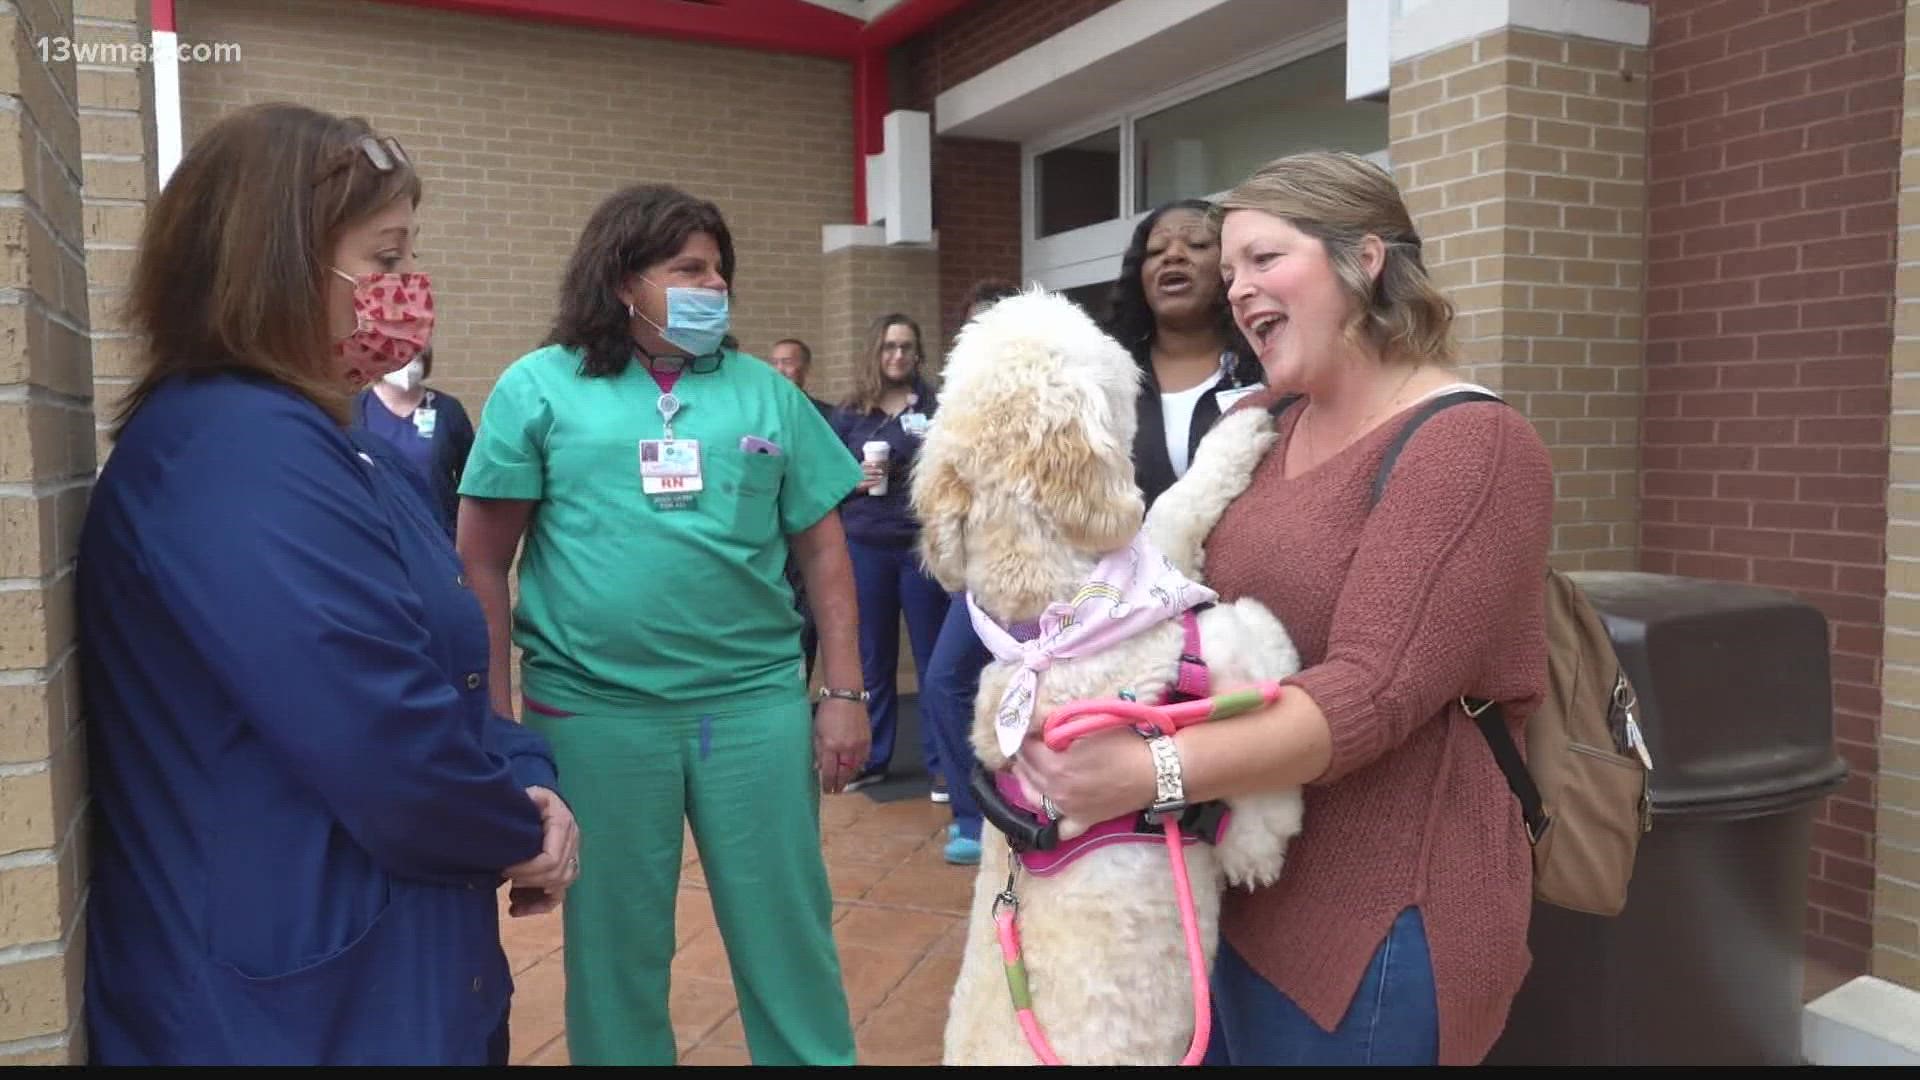 On Monday, nurses got to pet and play with pups from the Alliance of Therapy Dogs beginning at 10 a.m.